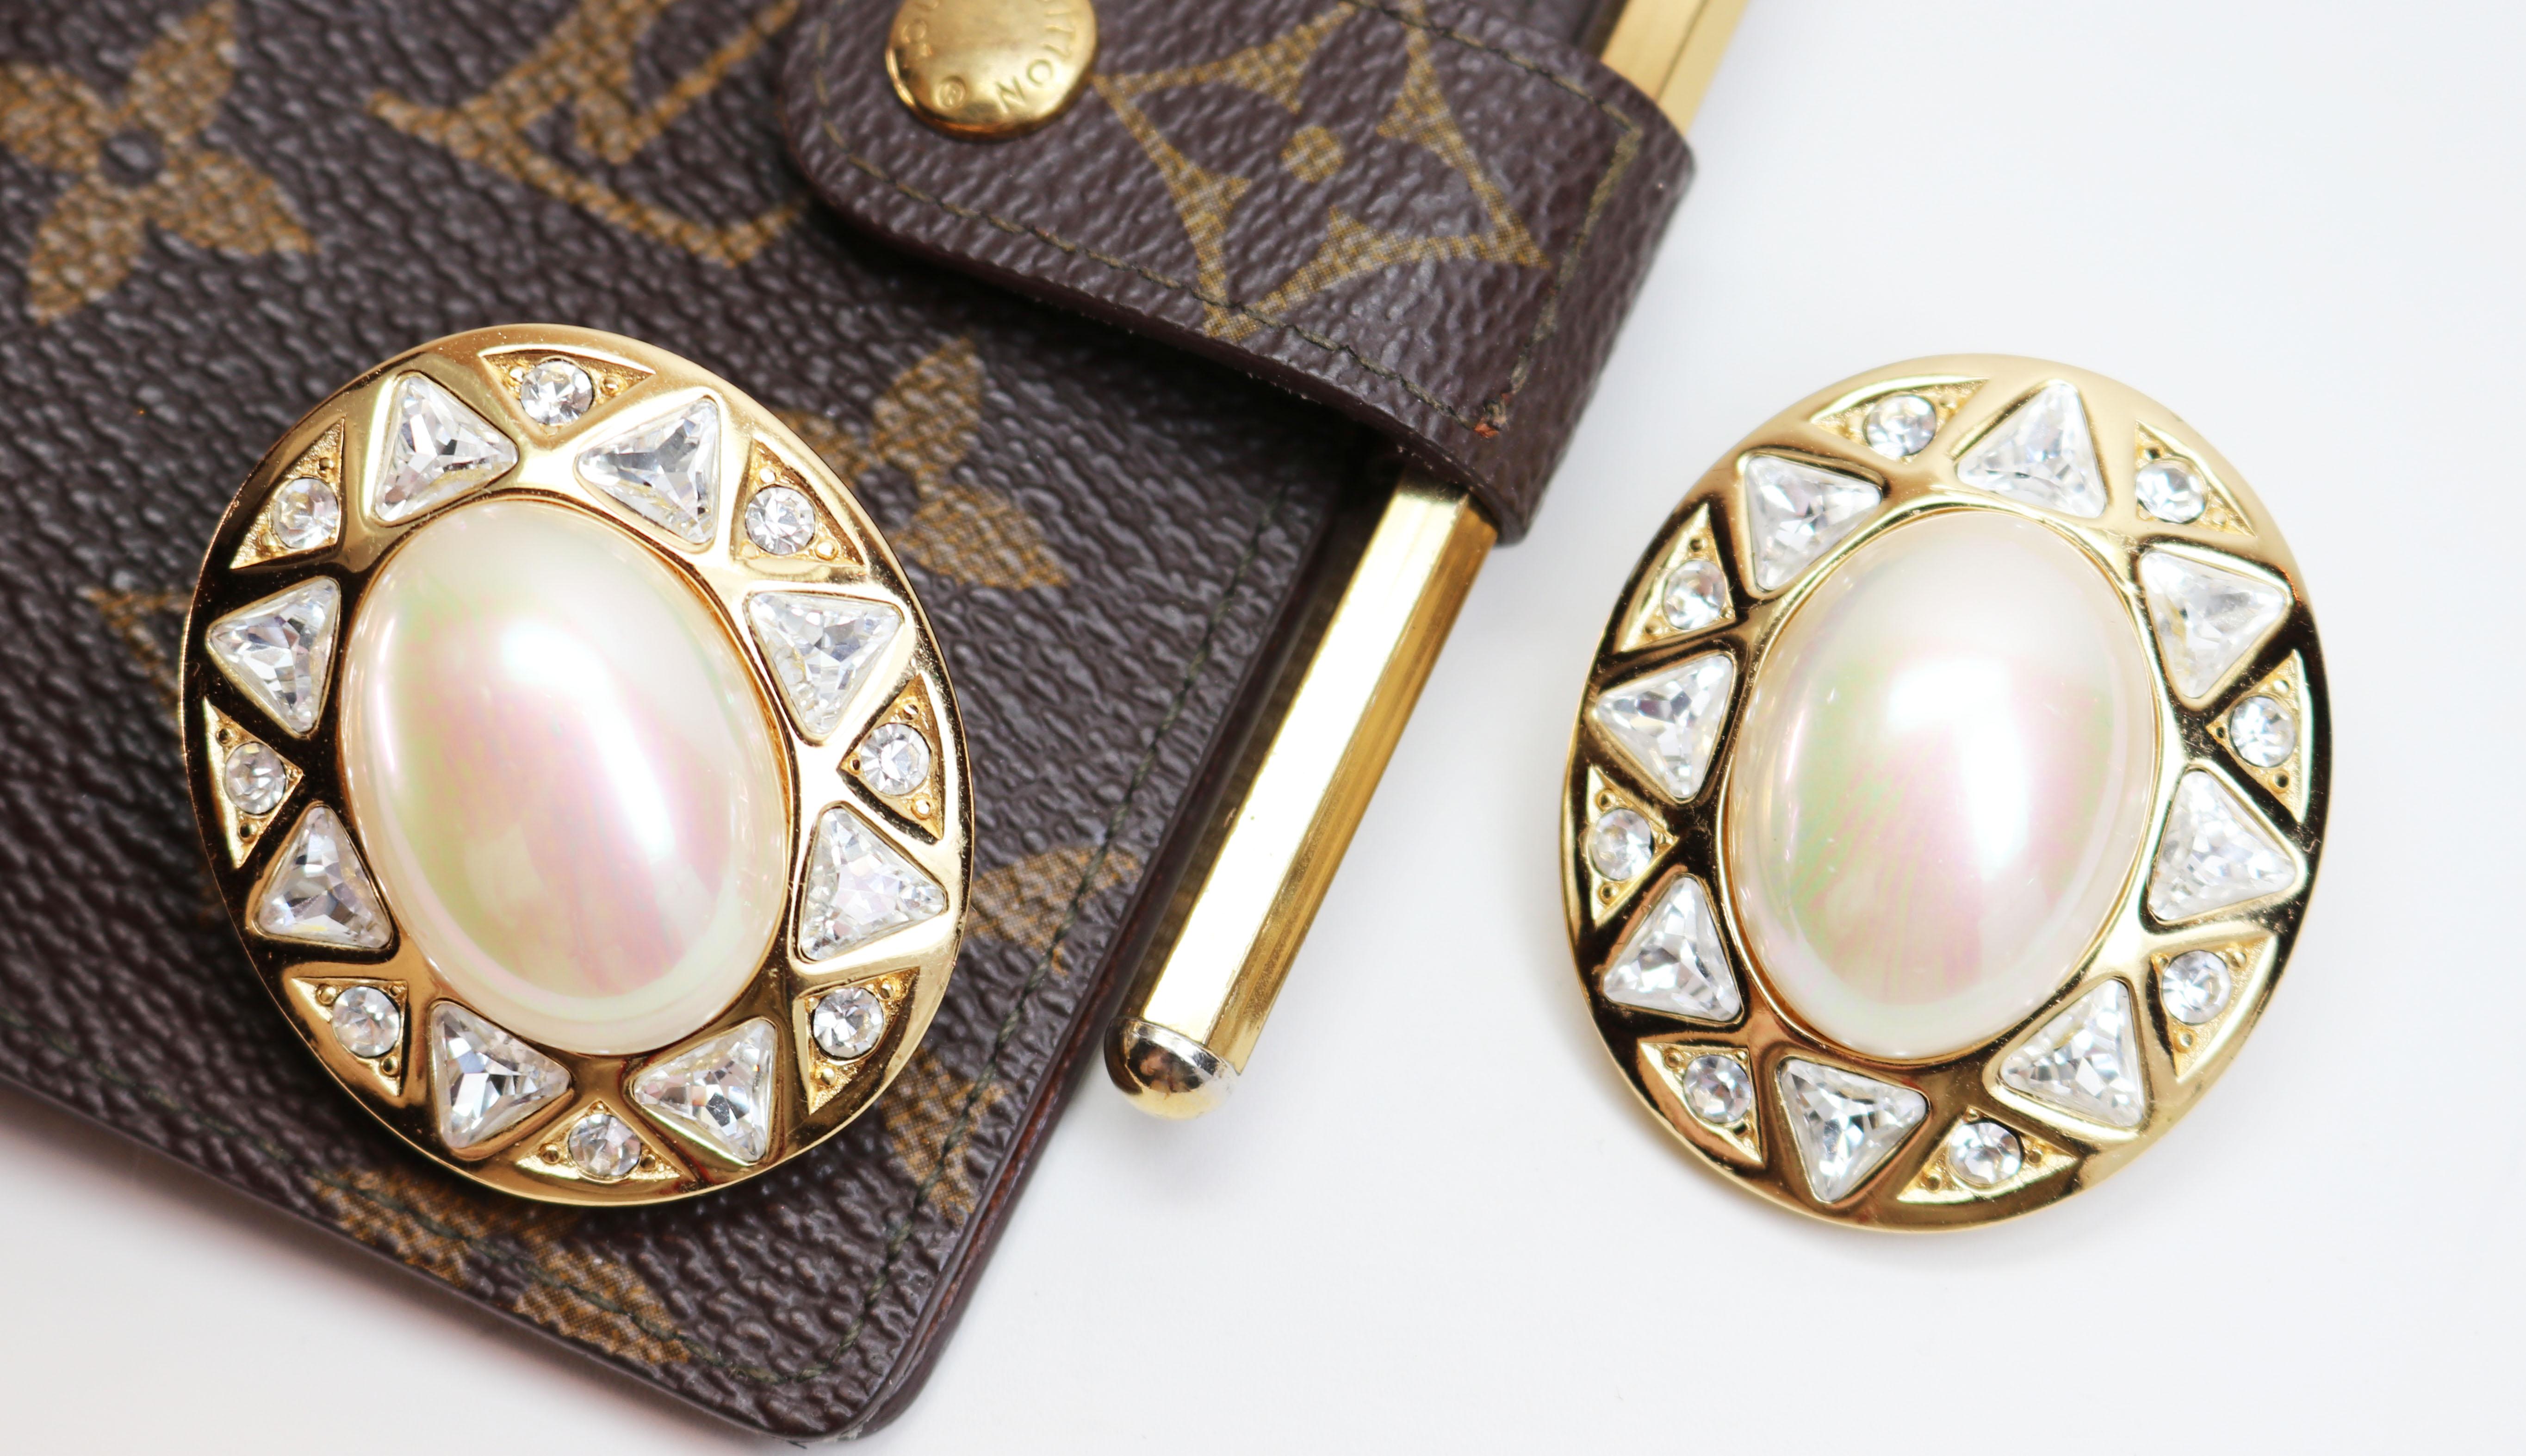 Christian Dior Pearl and Crystal Earrings In Excellent Condition For Sale In Mastic Beach, NY